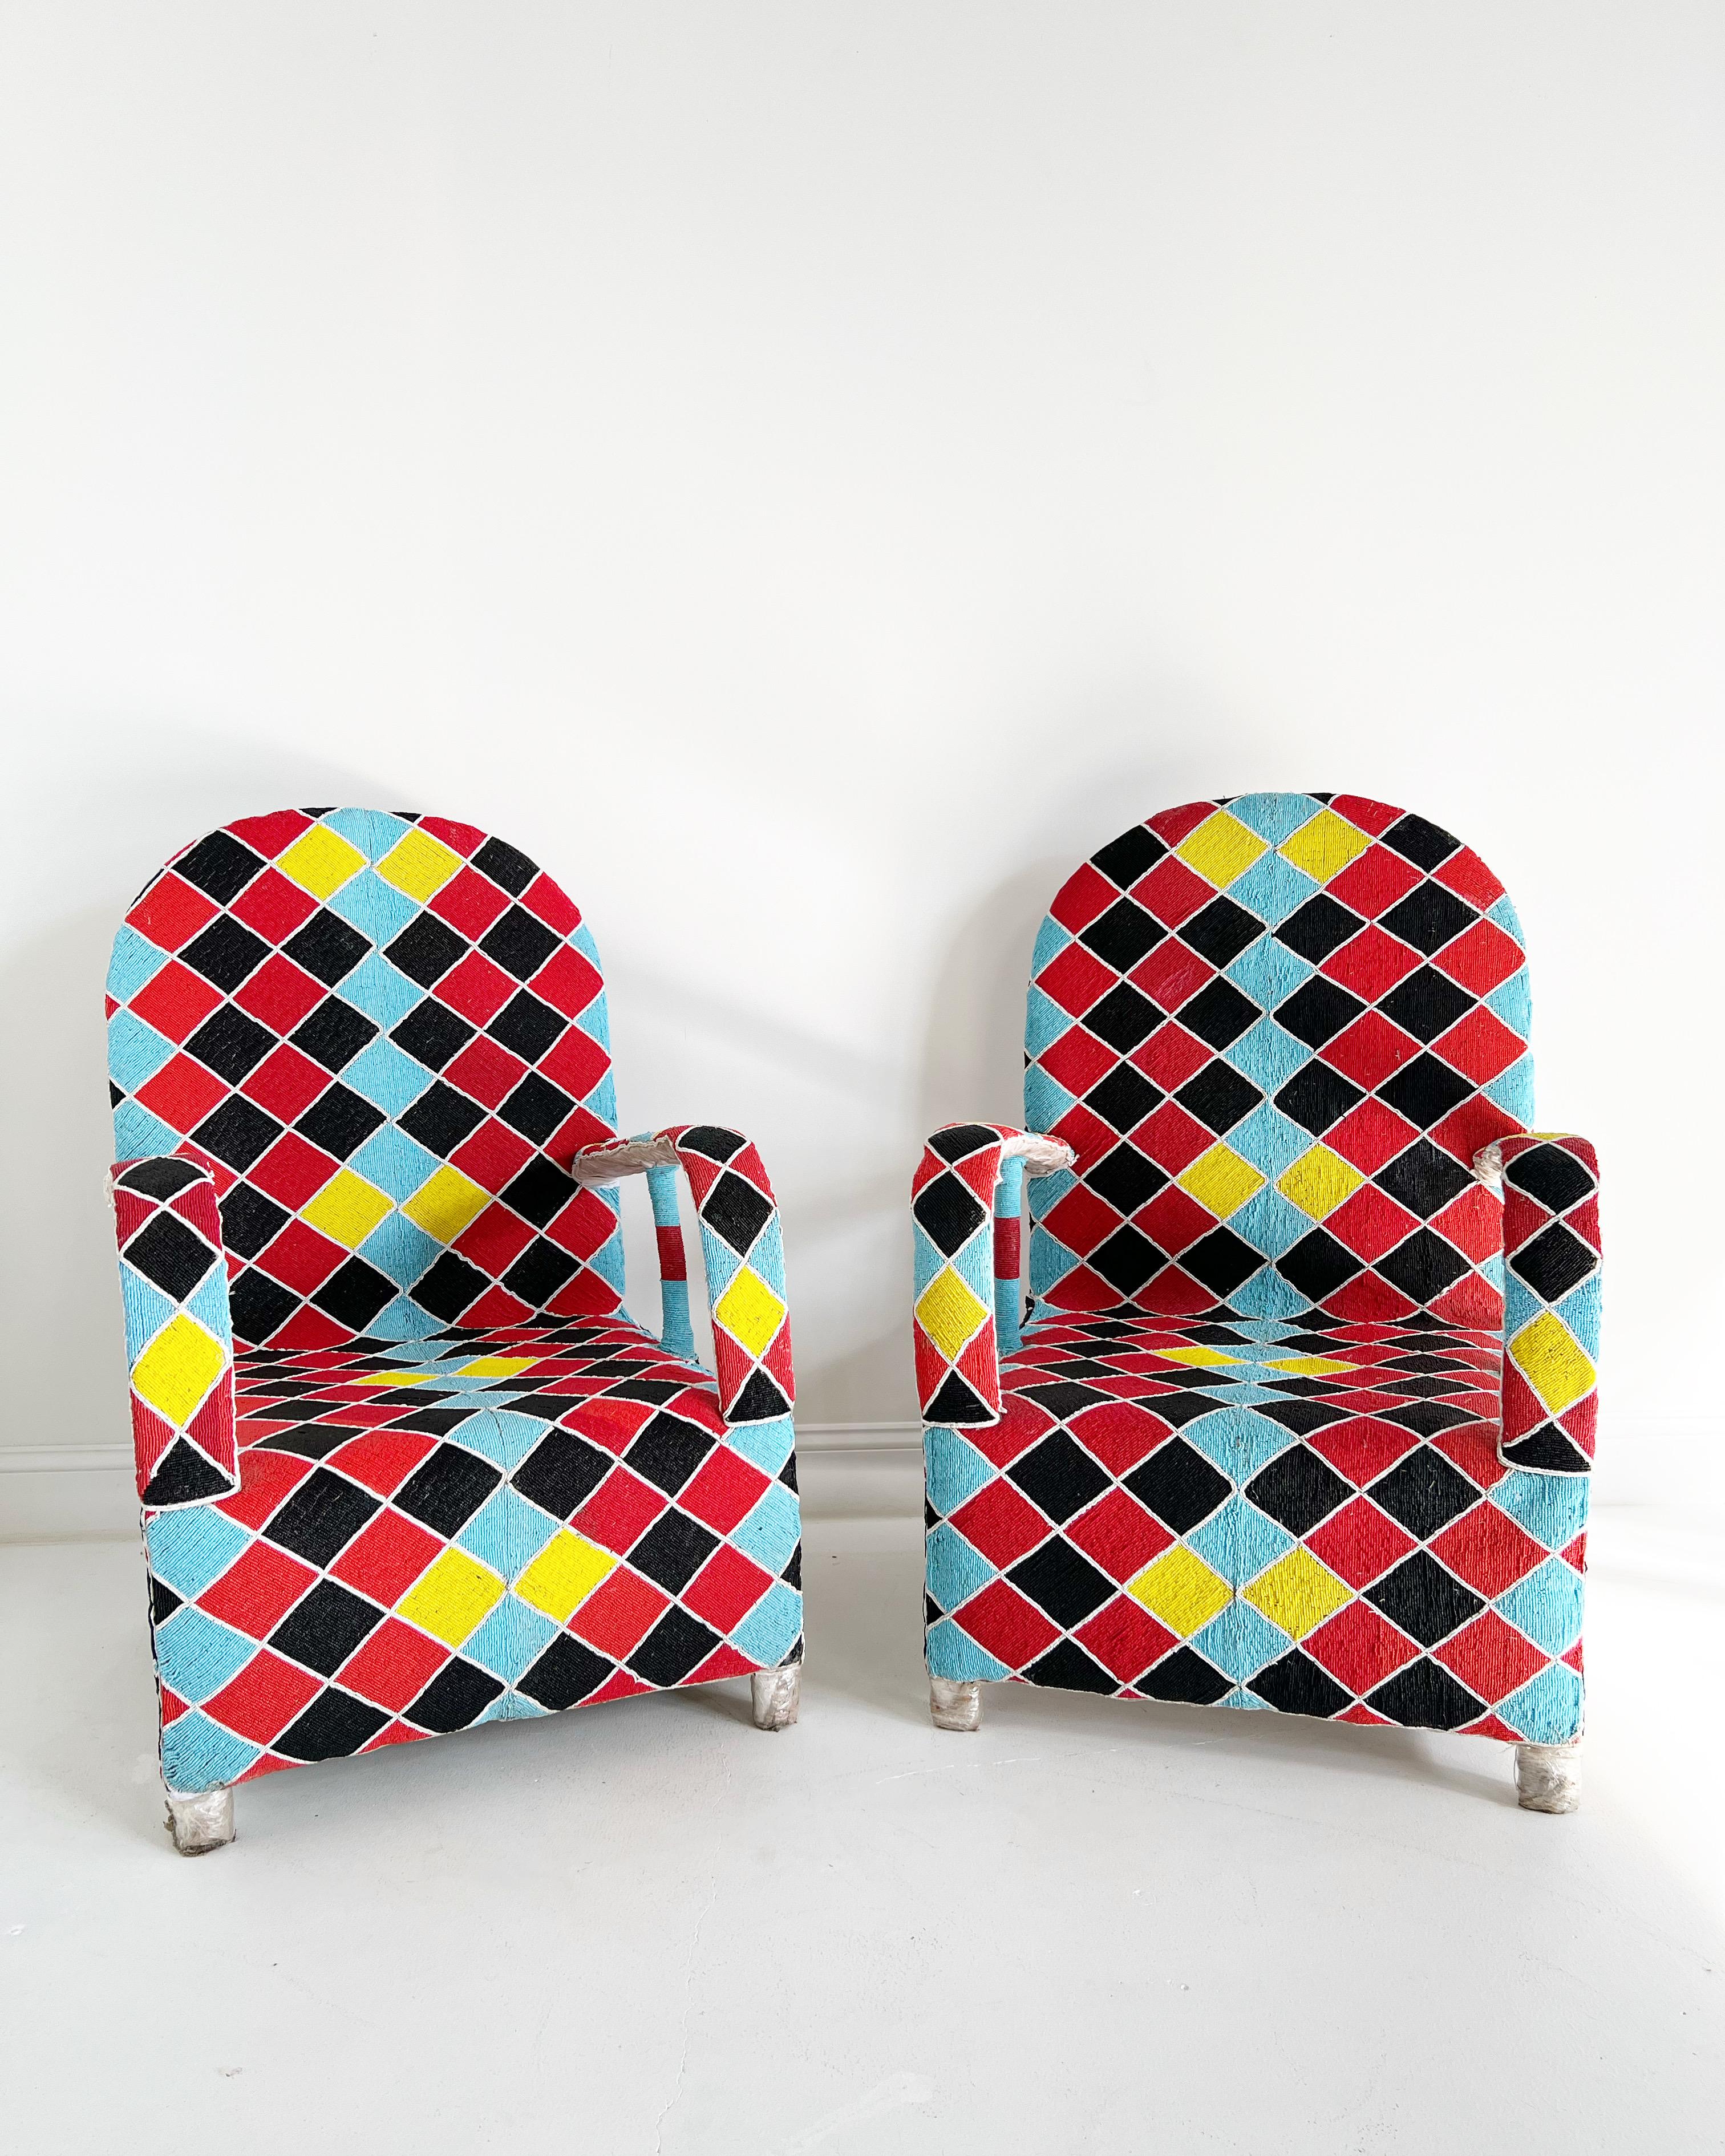 Nigerian Vintage African Beaded Yoruba Chair, Multicolor, 2 Chairs Available For Sale